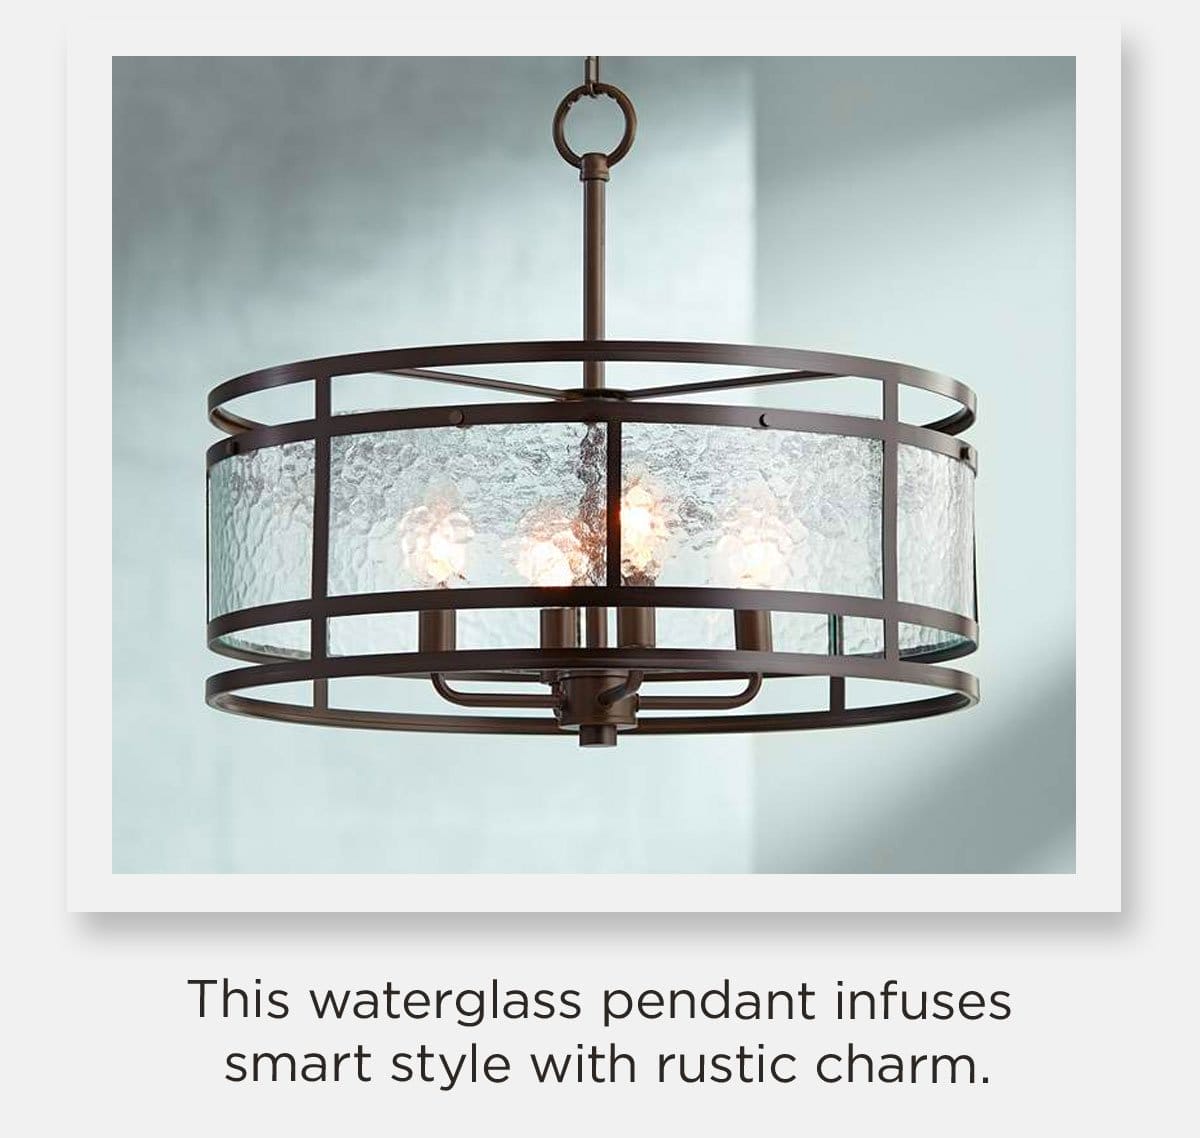 This waterglass pendant infuses smart style with rustic charm.